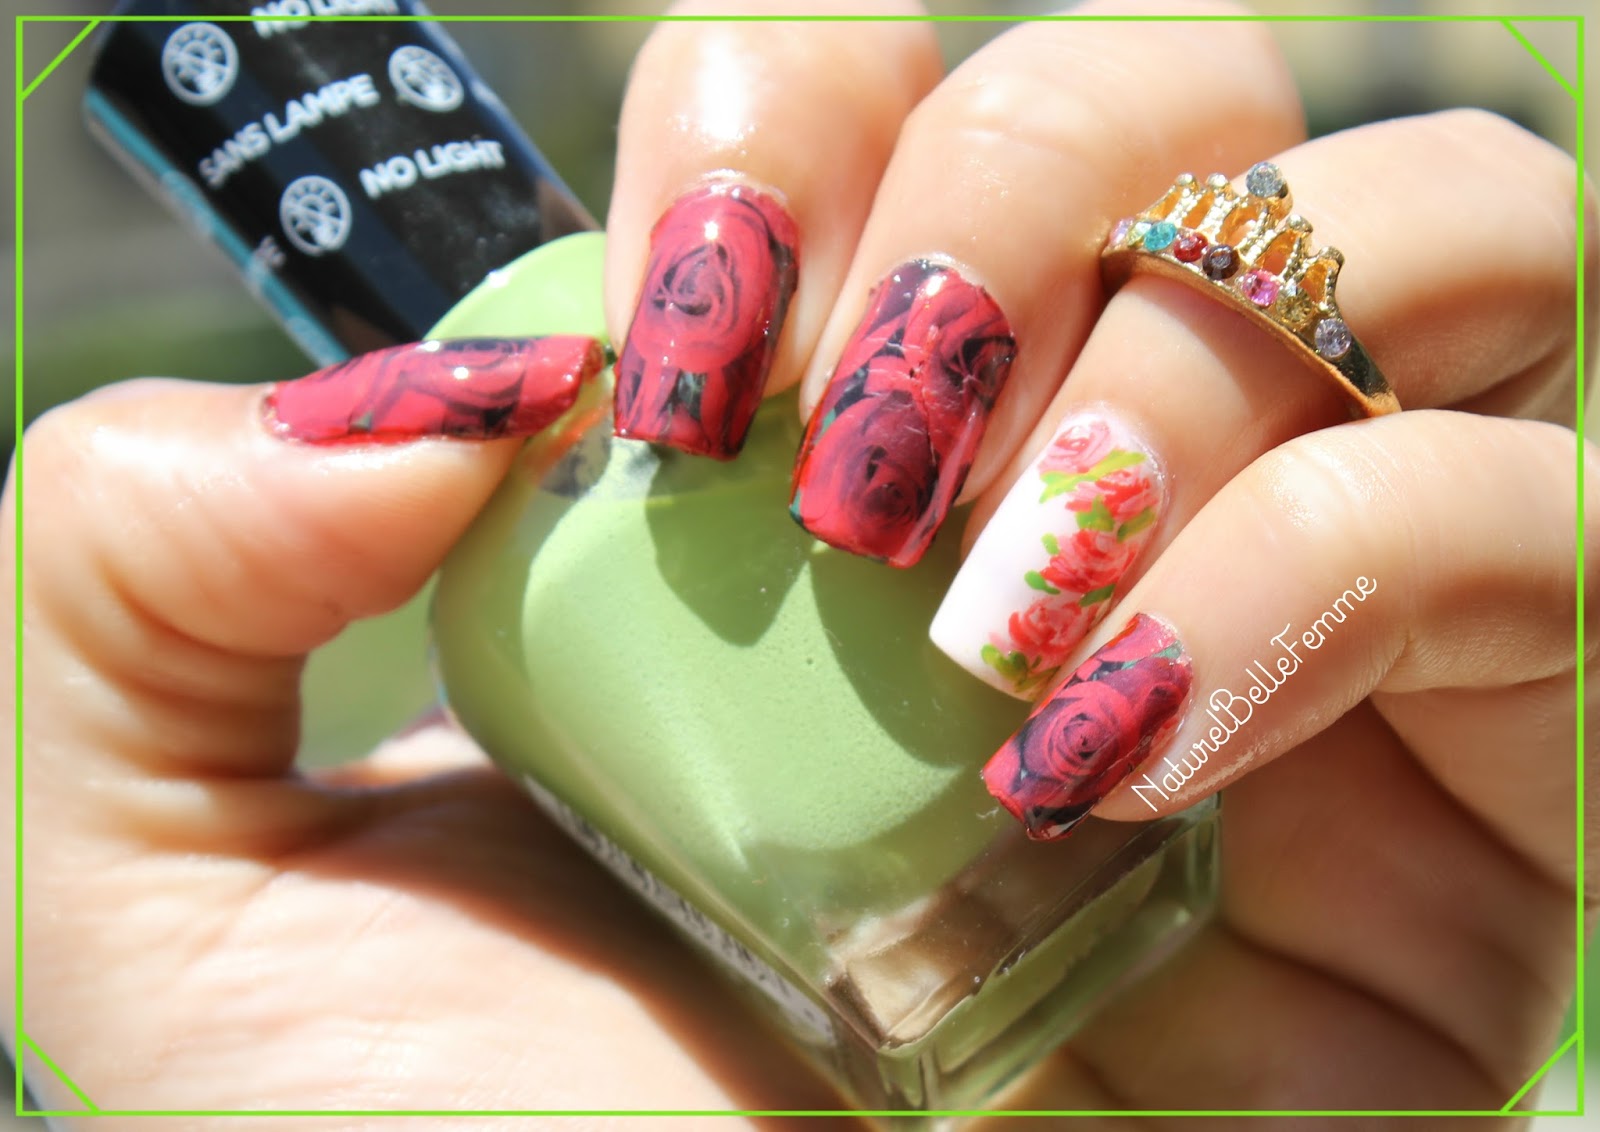 8. "3D Rose Nail Art with Crystal Centers" - wide 5